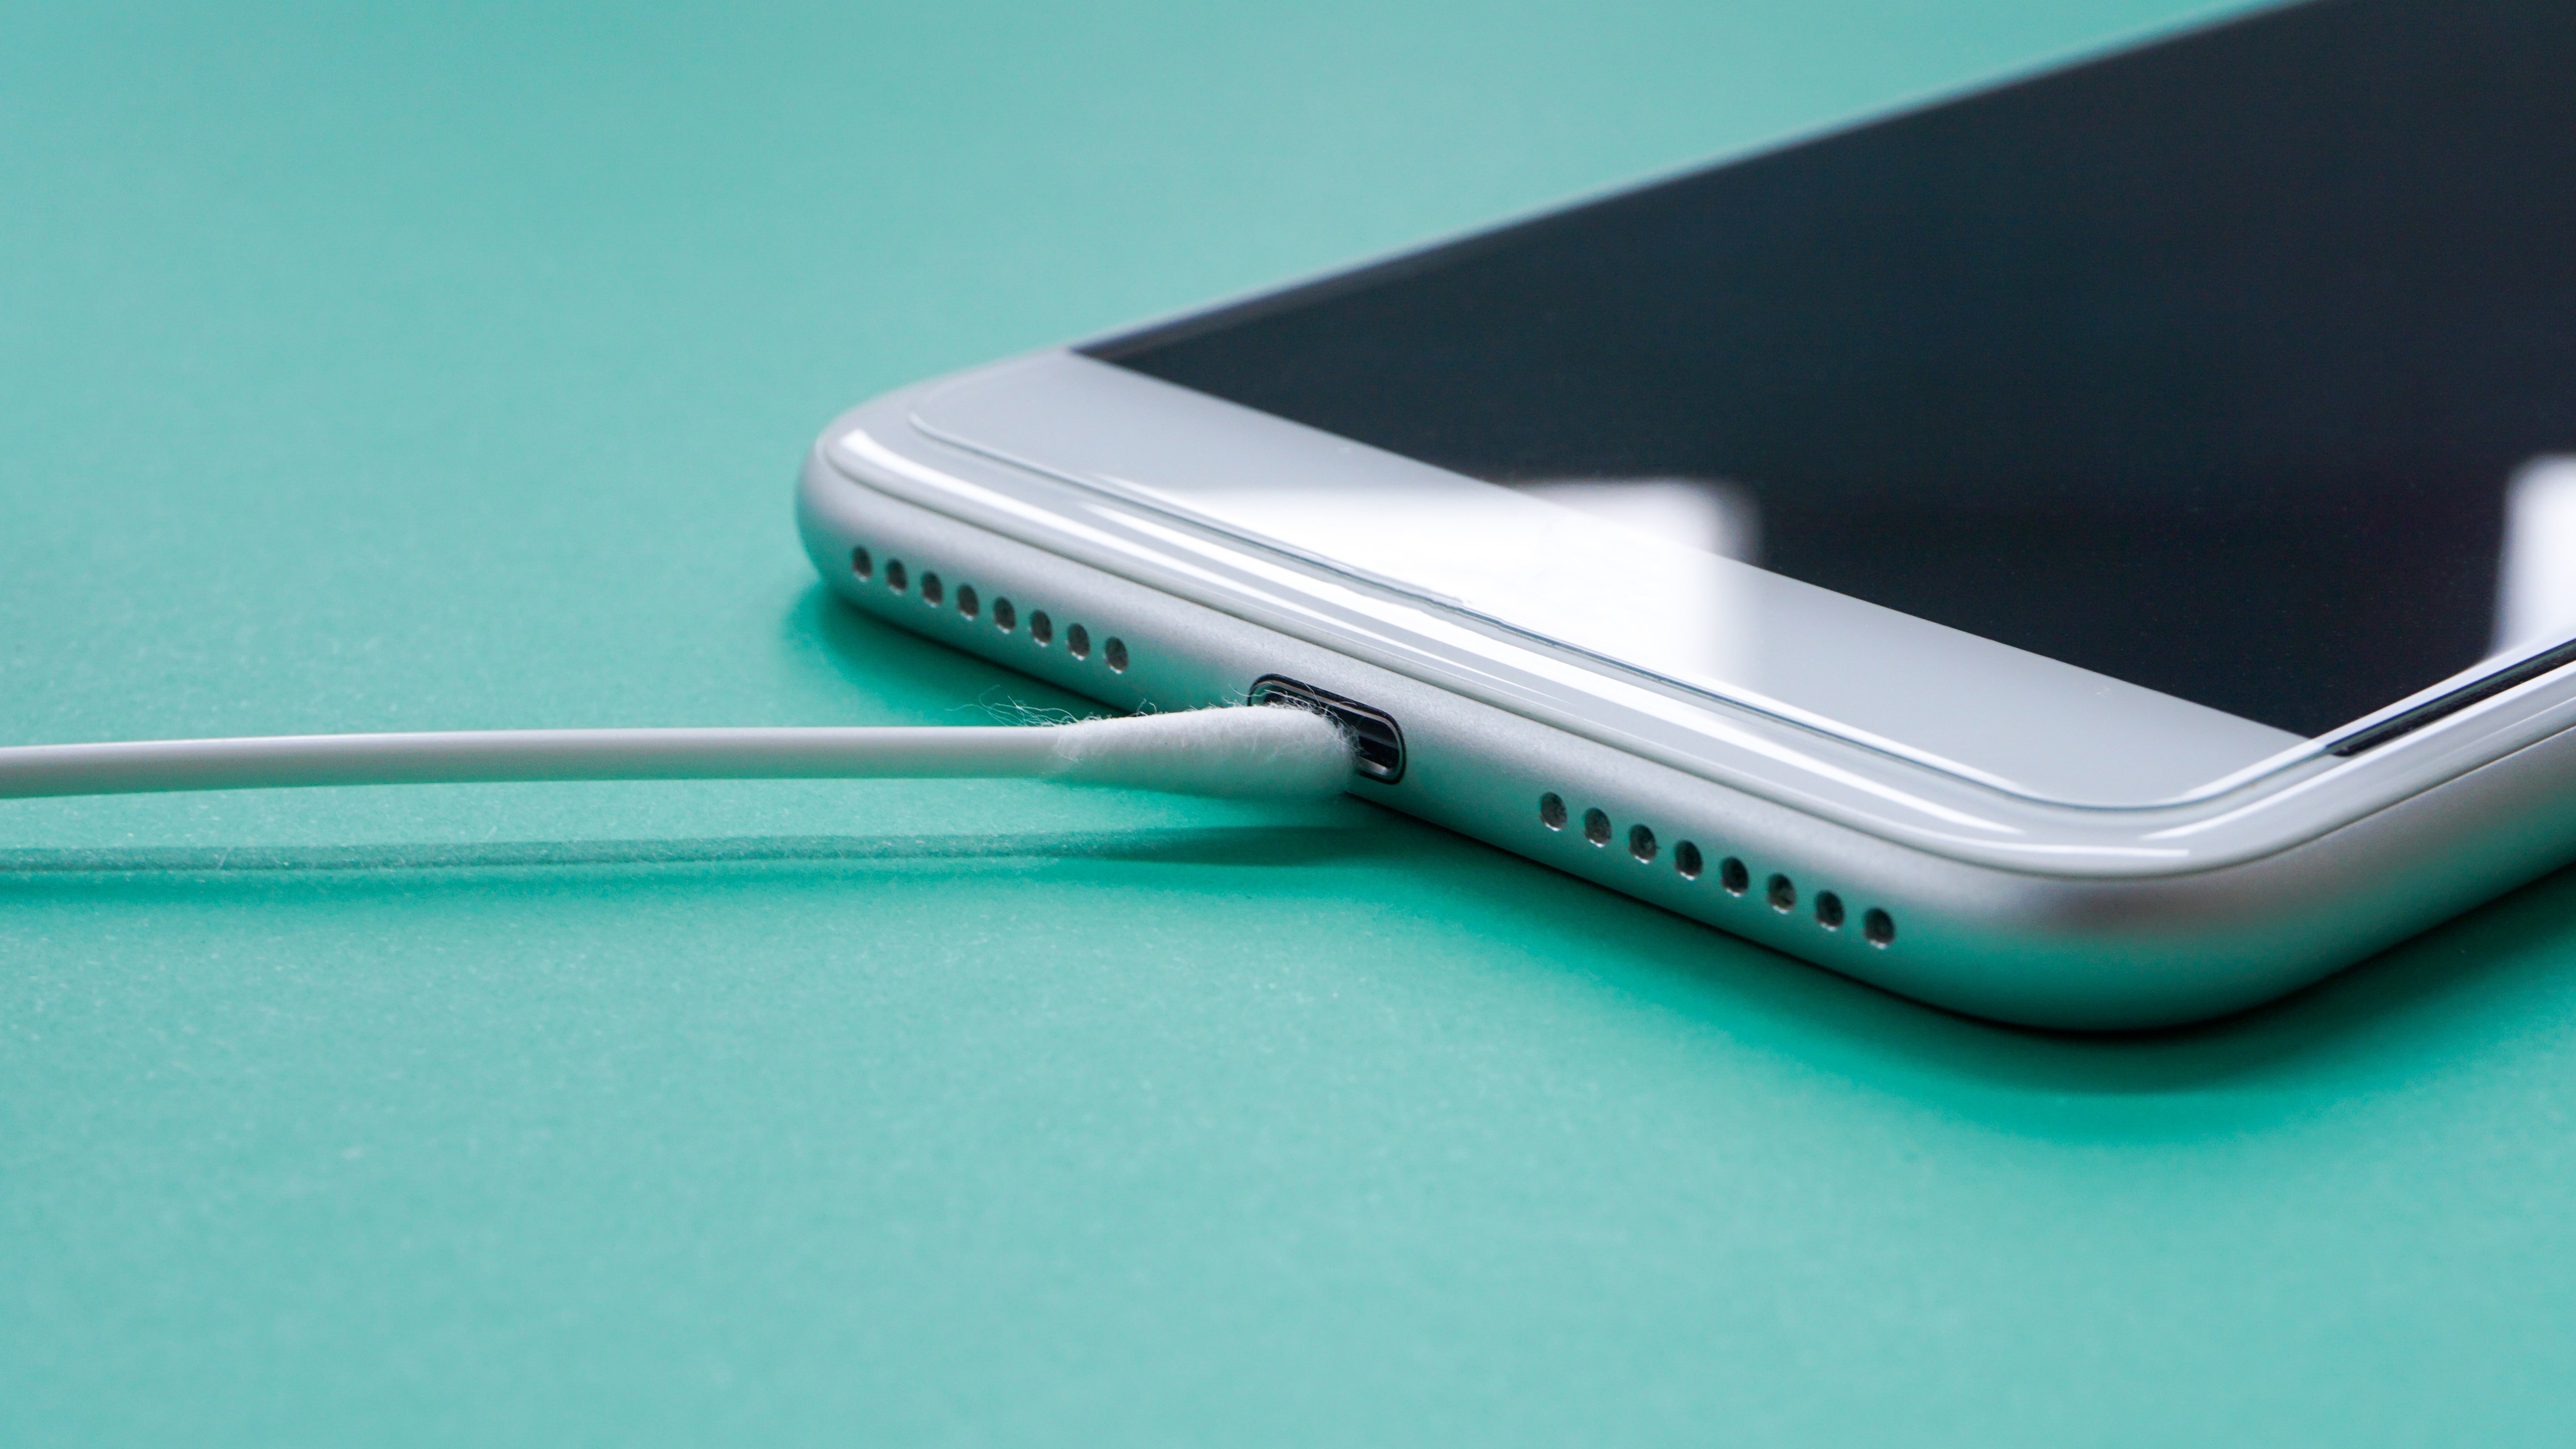 Cotton bud being used to clean a phone charging port